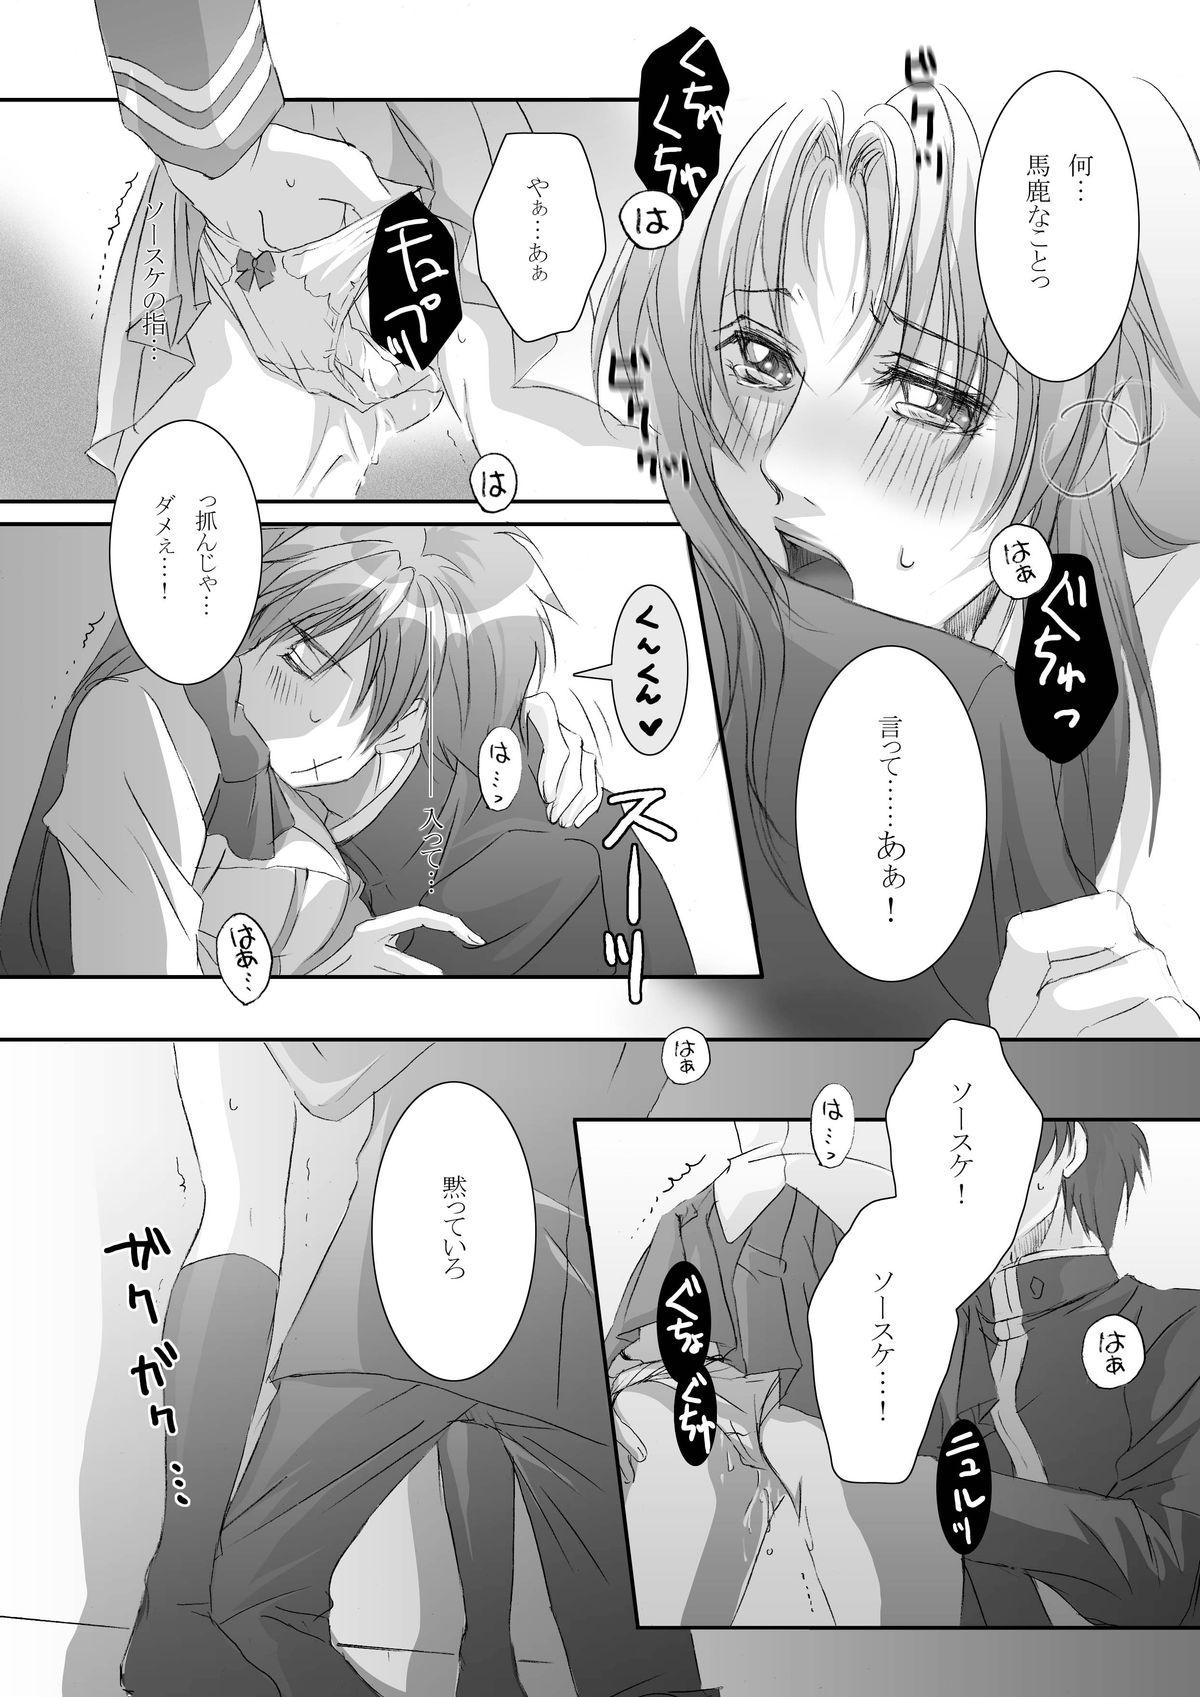 Punished Anjel Seven A7 - Full metal panic Young Men - Page 11